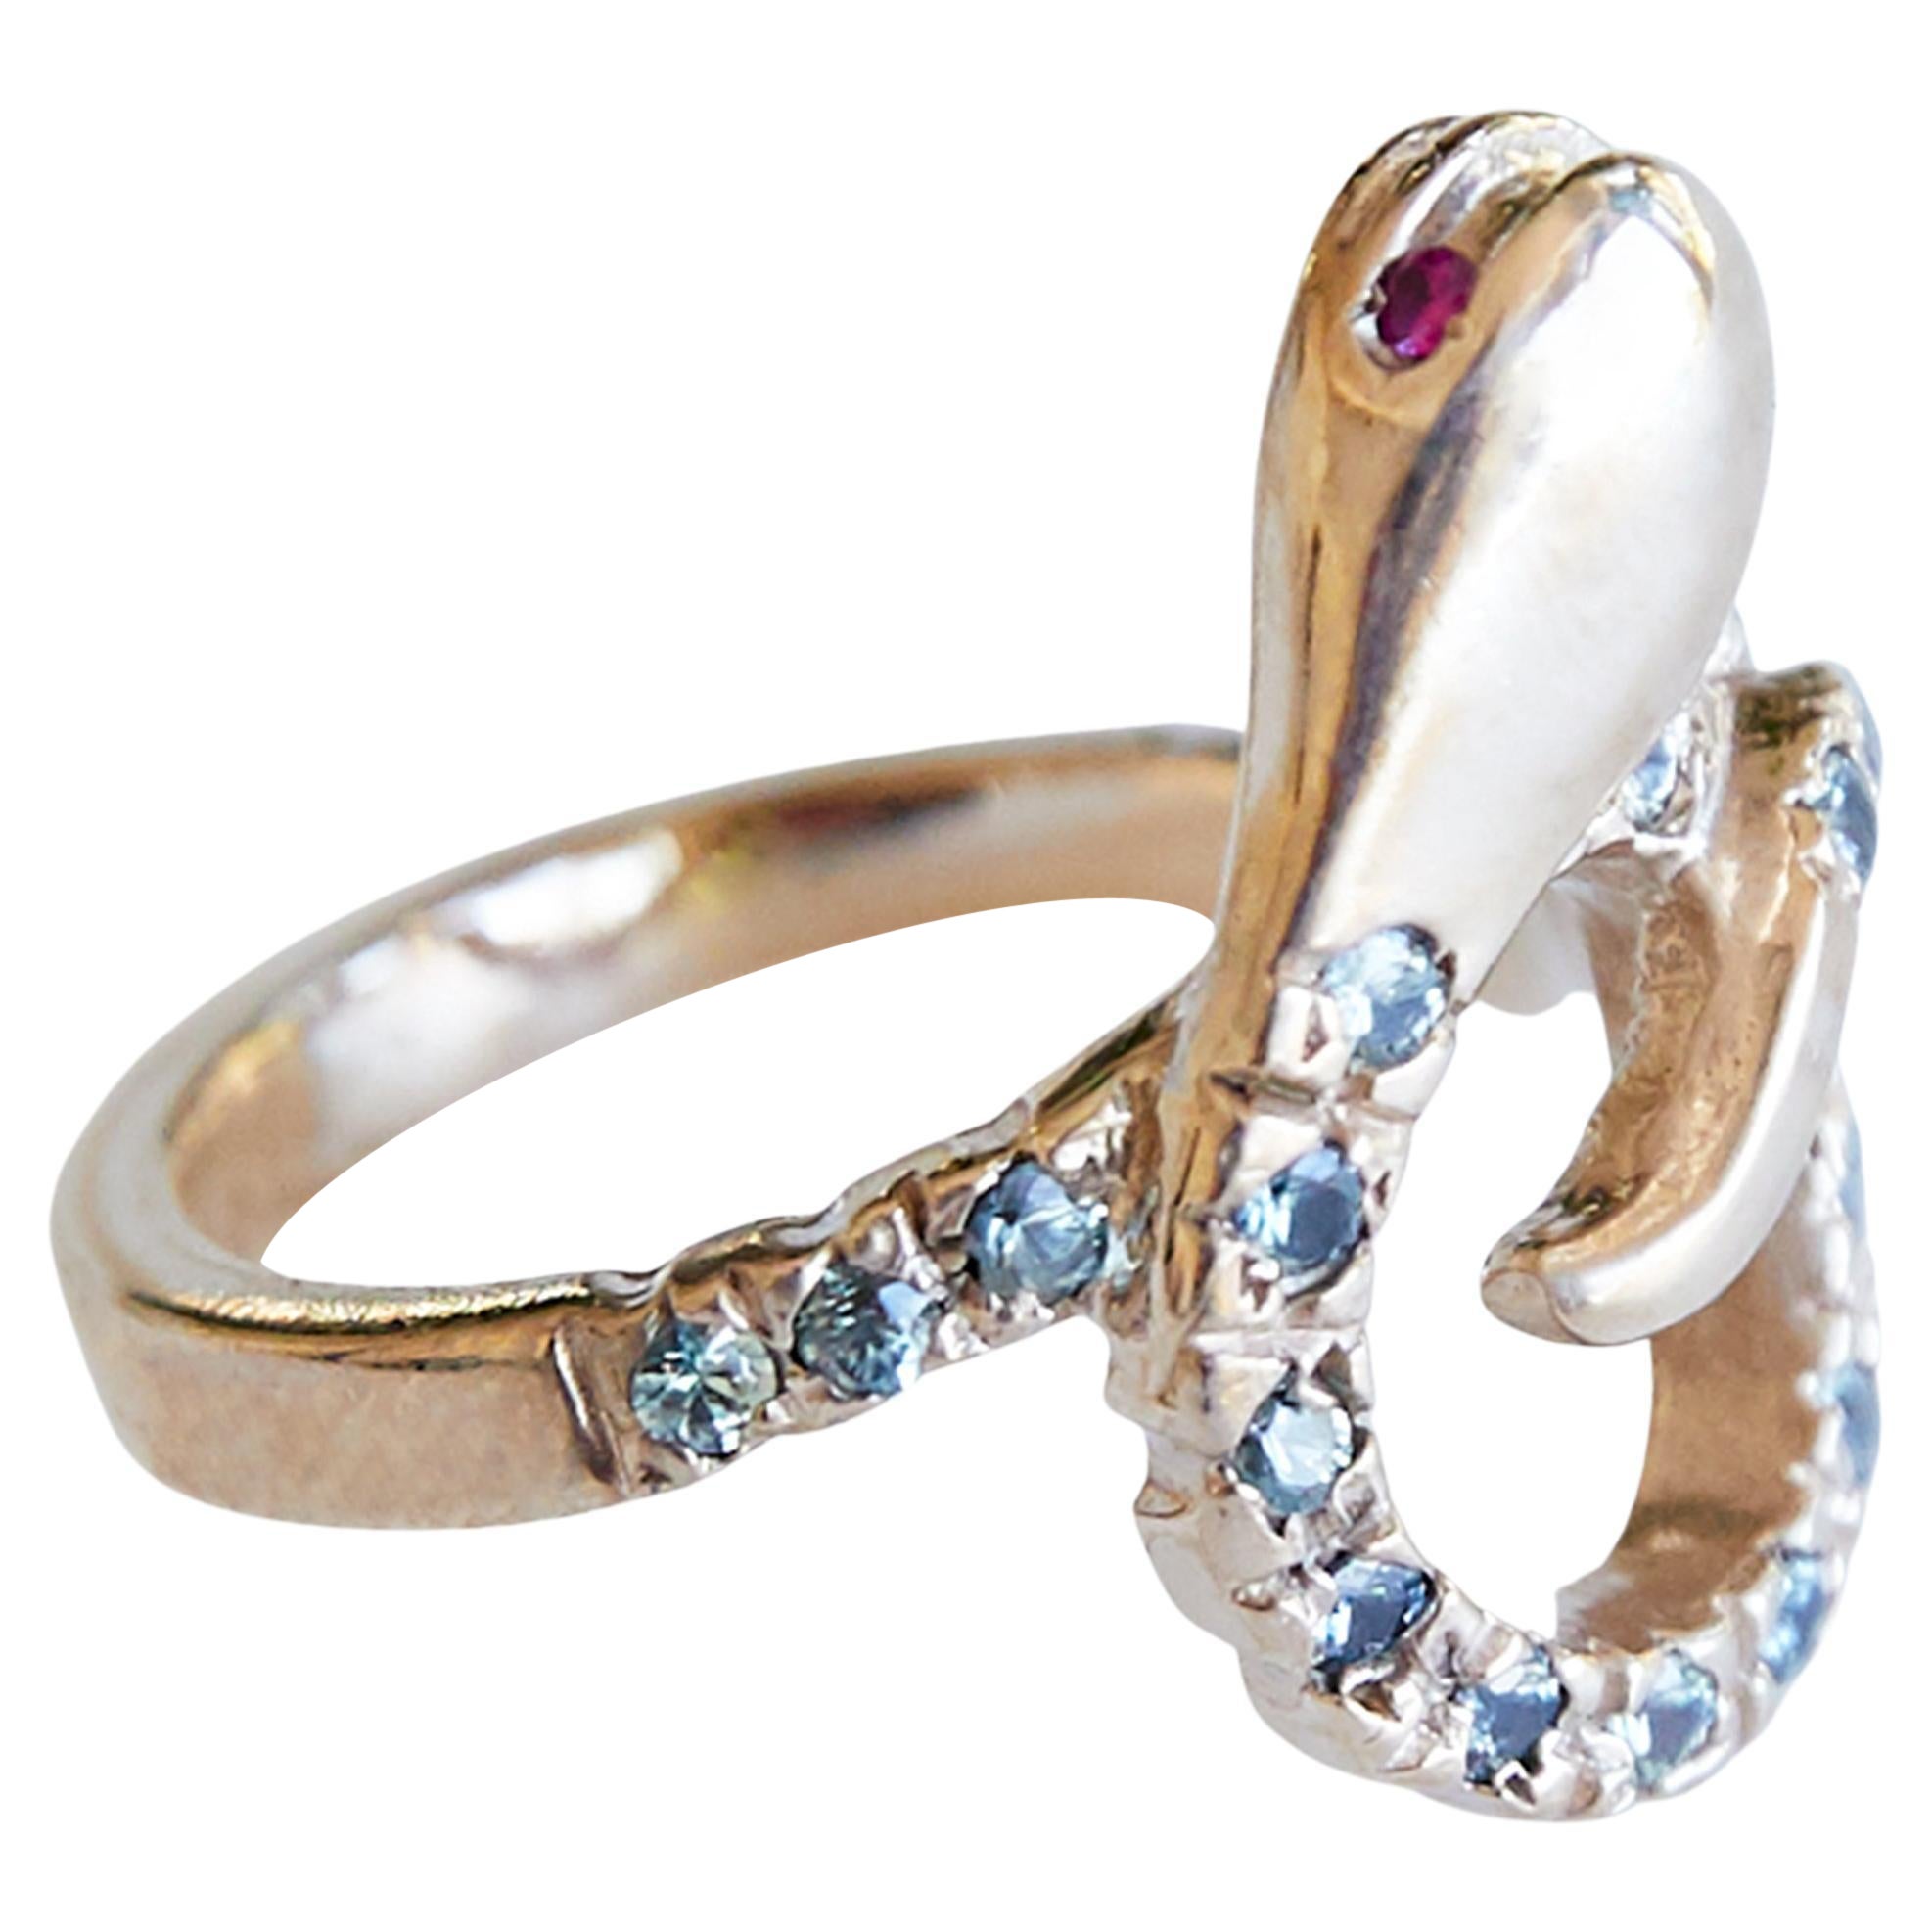 Gold Snake Ring Cocktail Ring Sapphire Ruby Animal jewelry For Sale